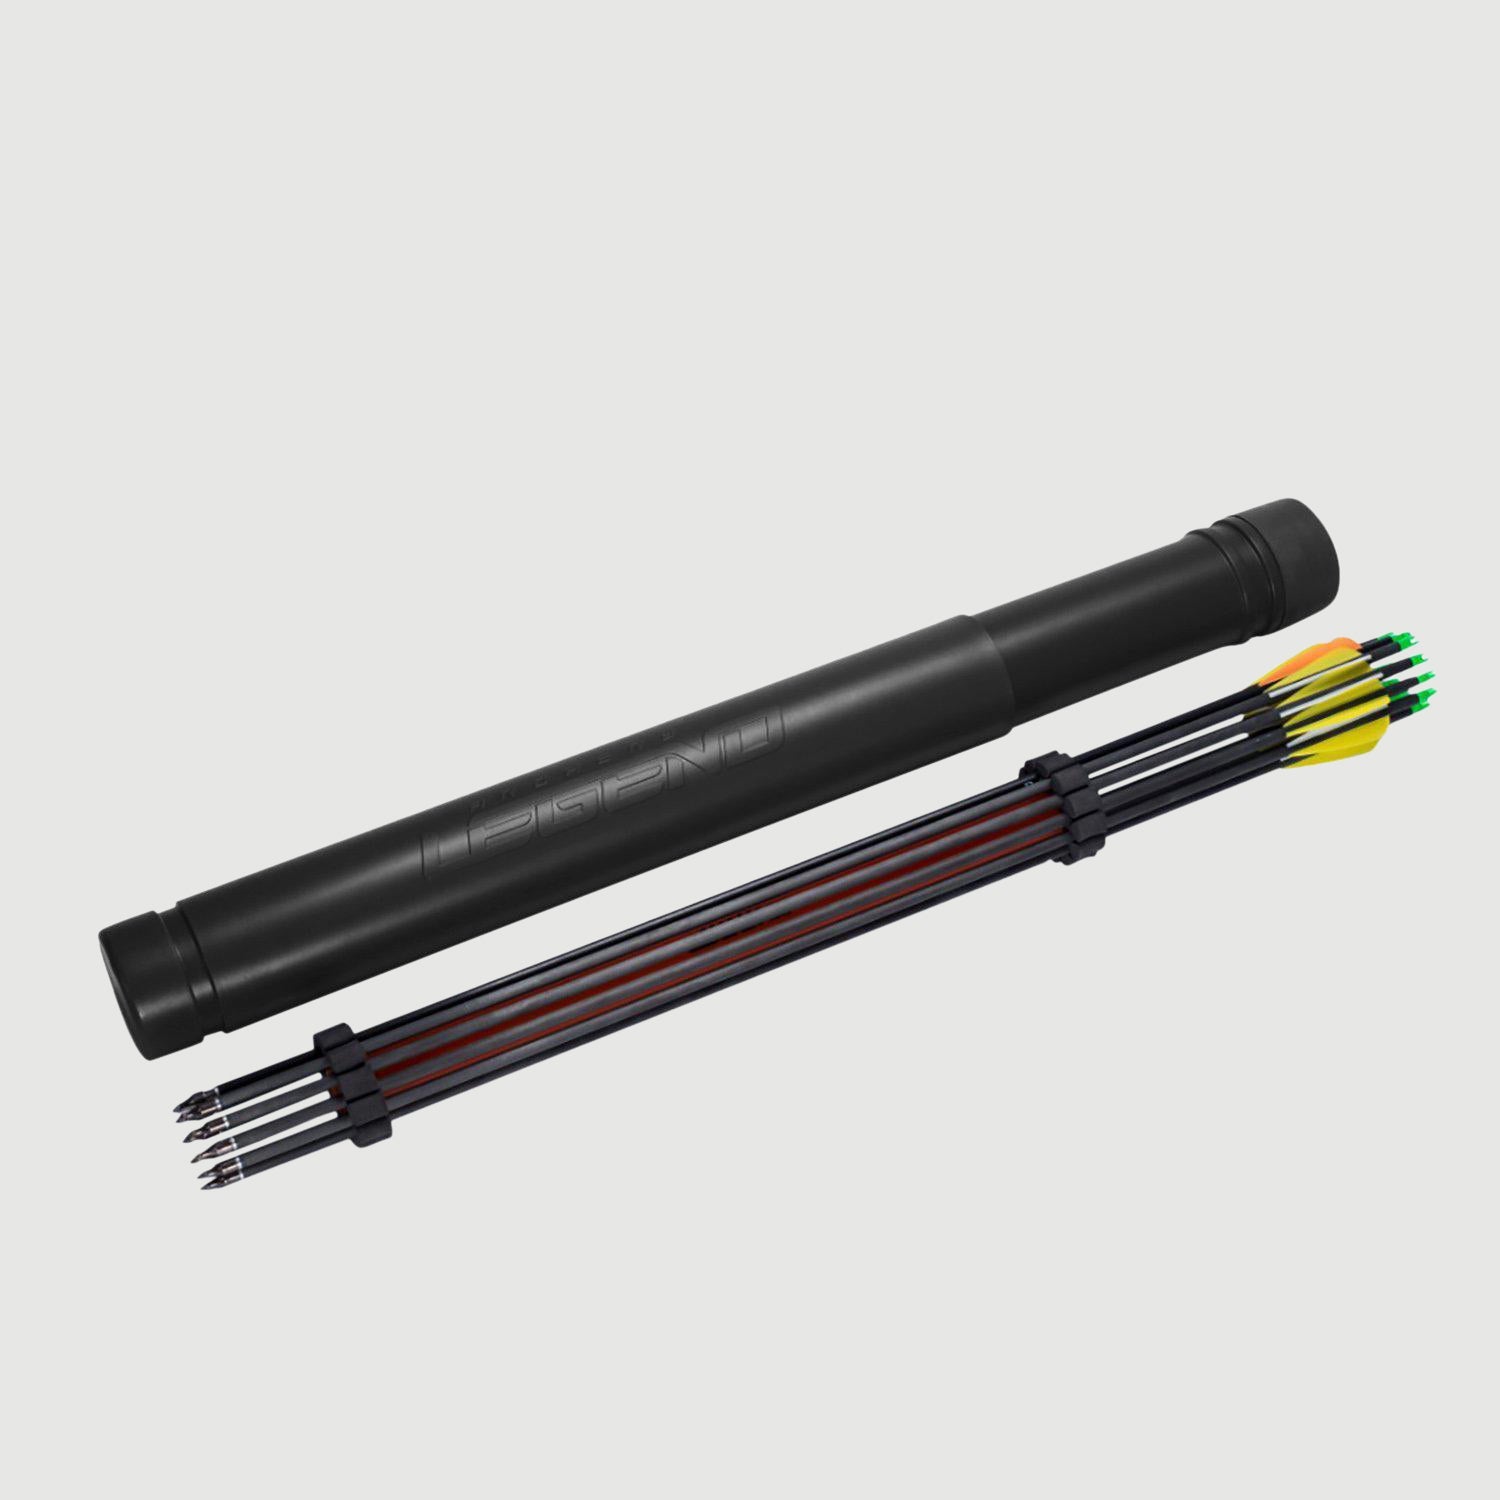 keep your arrows organized, safe, and ready for your next shot with Red Arrow Tube with Holder